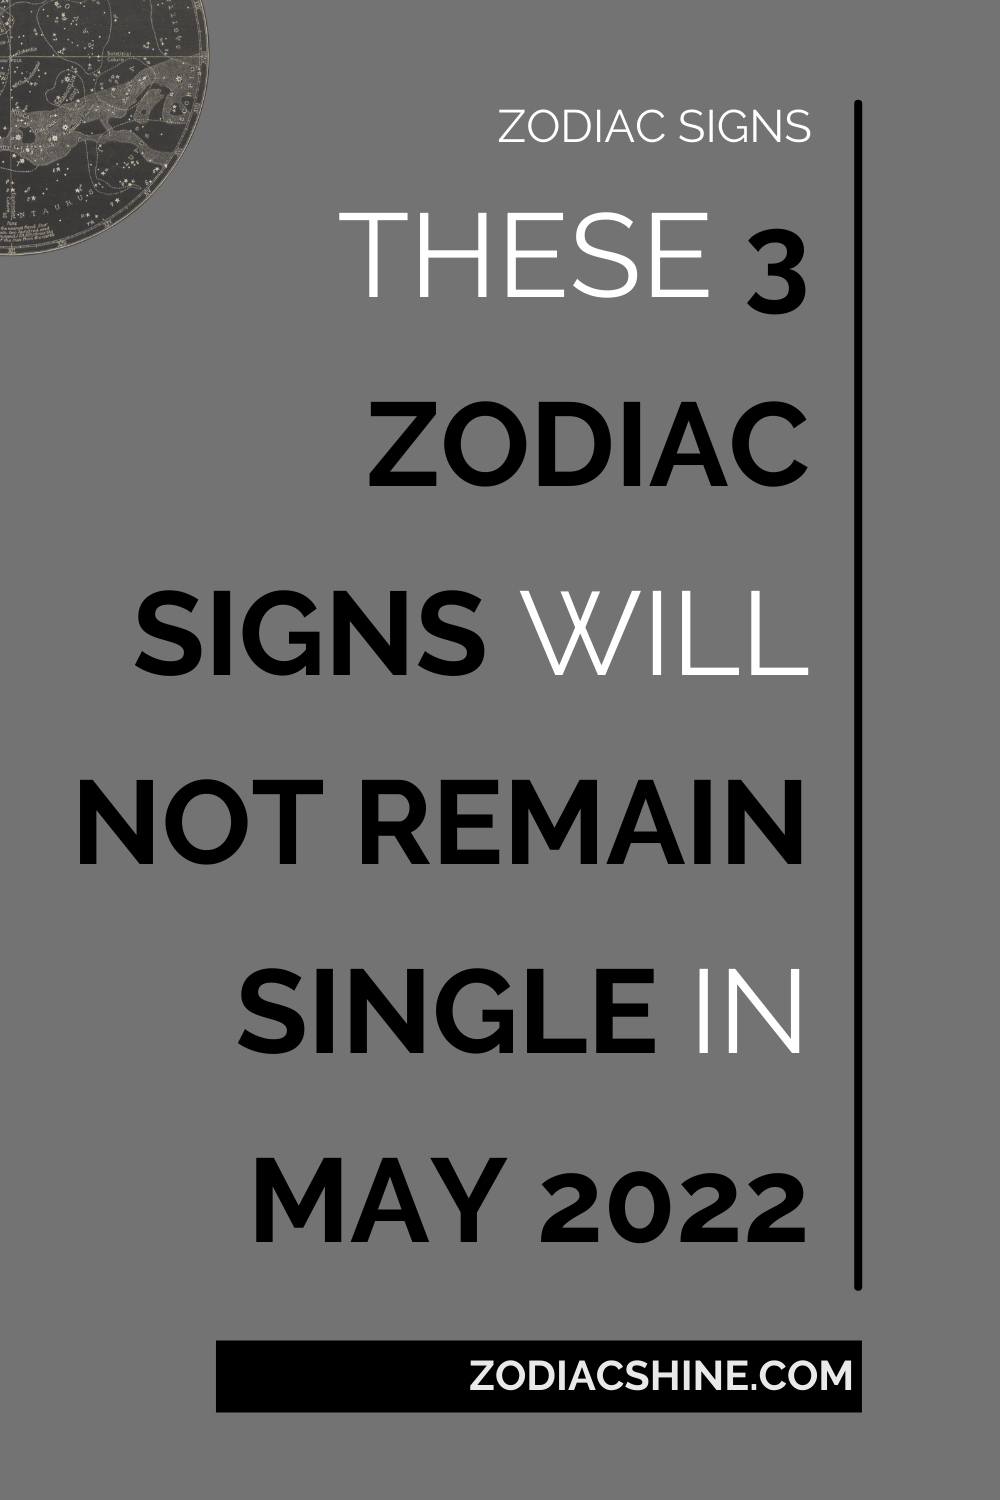 These 3 Zodiac Signs Will Not Remain Single In May 2022